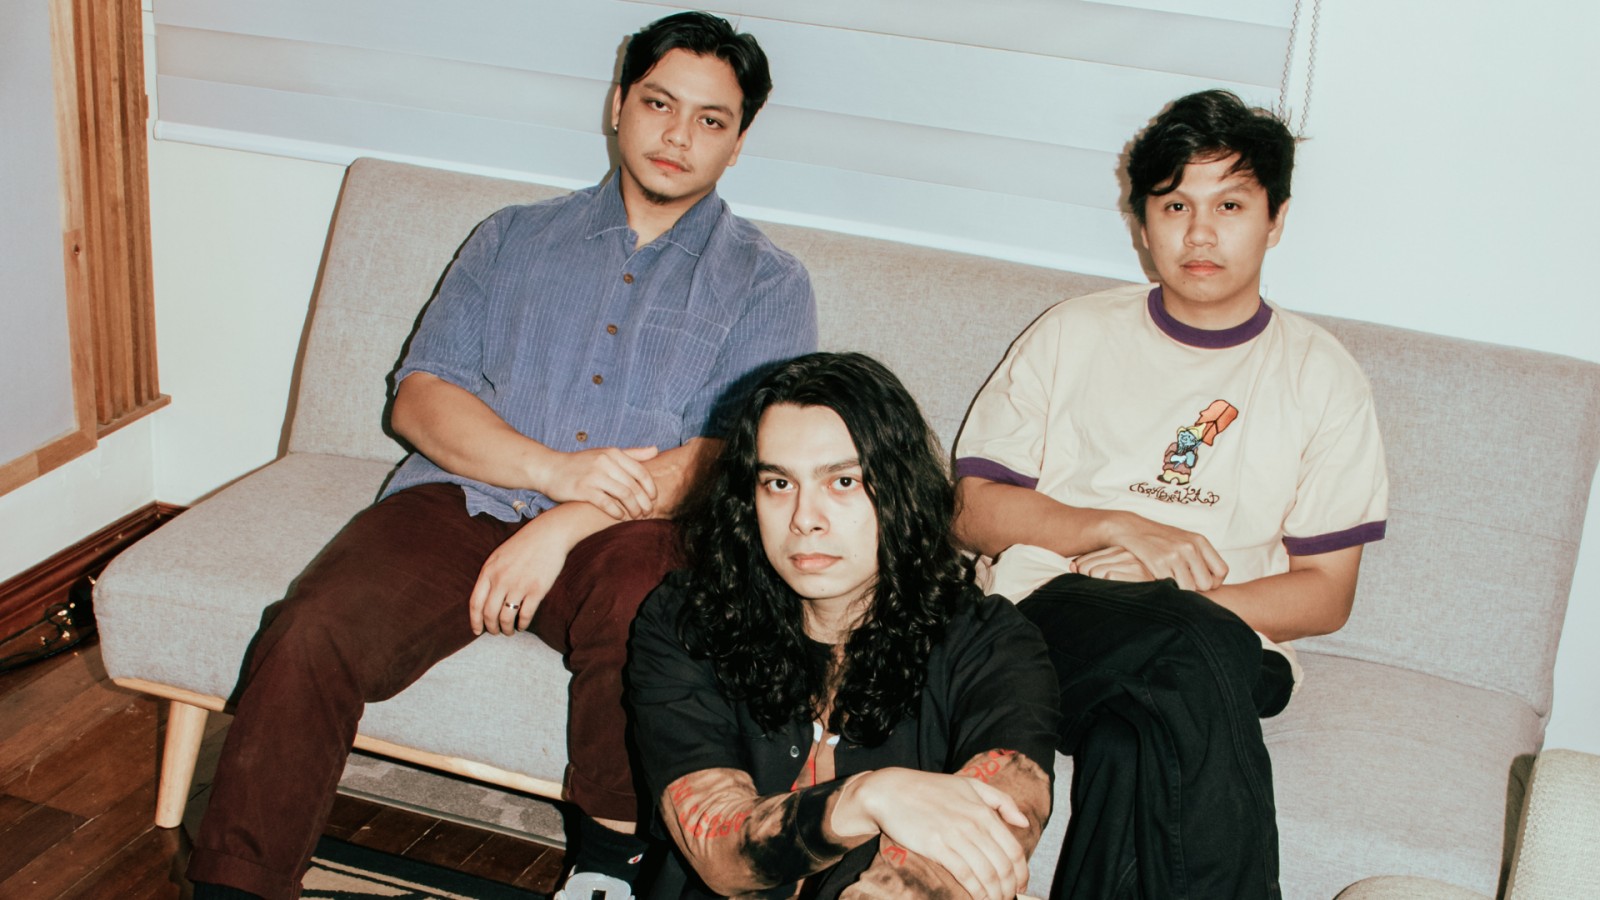 Filipino band of Mercury rides the soul train with ease in new single “That’s Why”